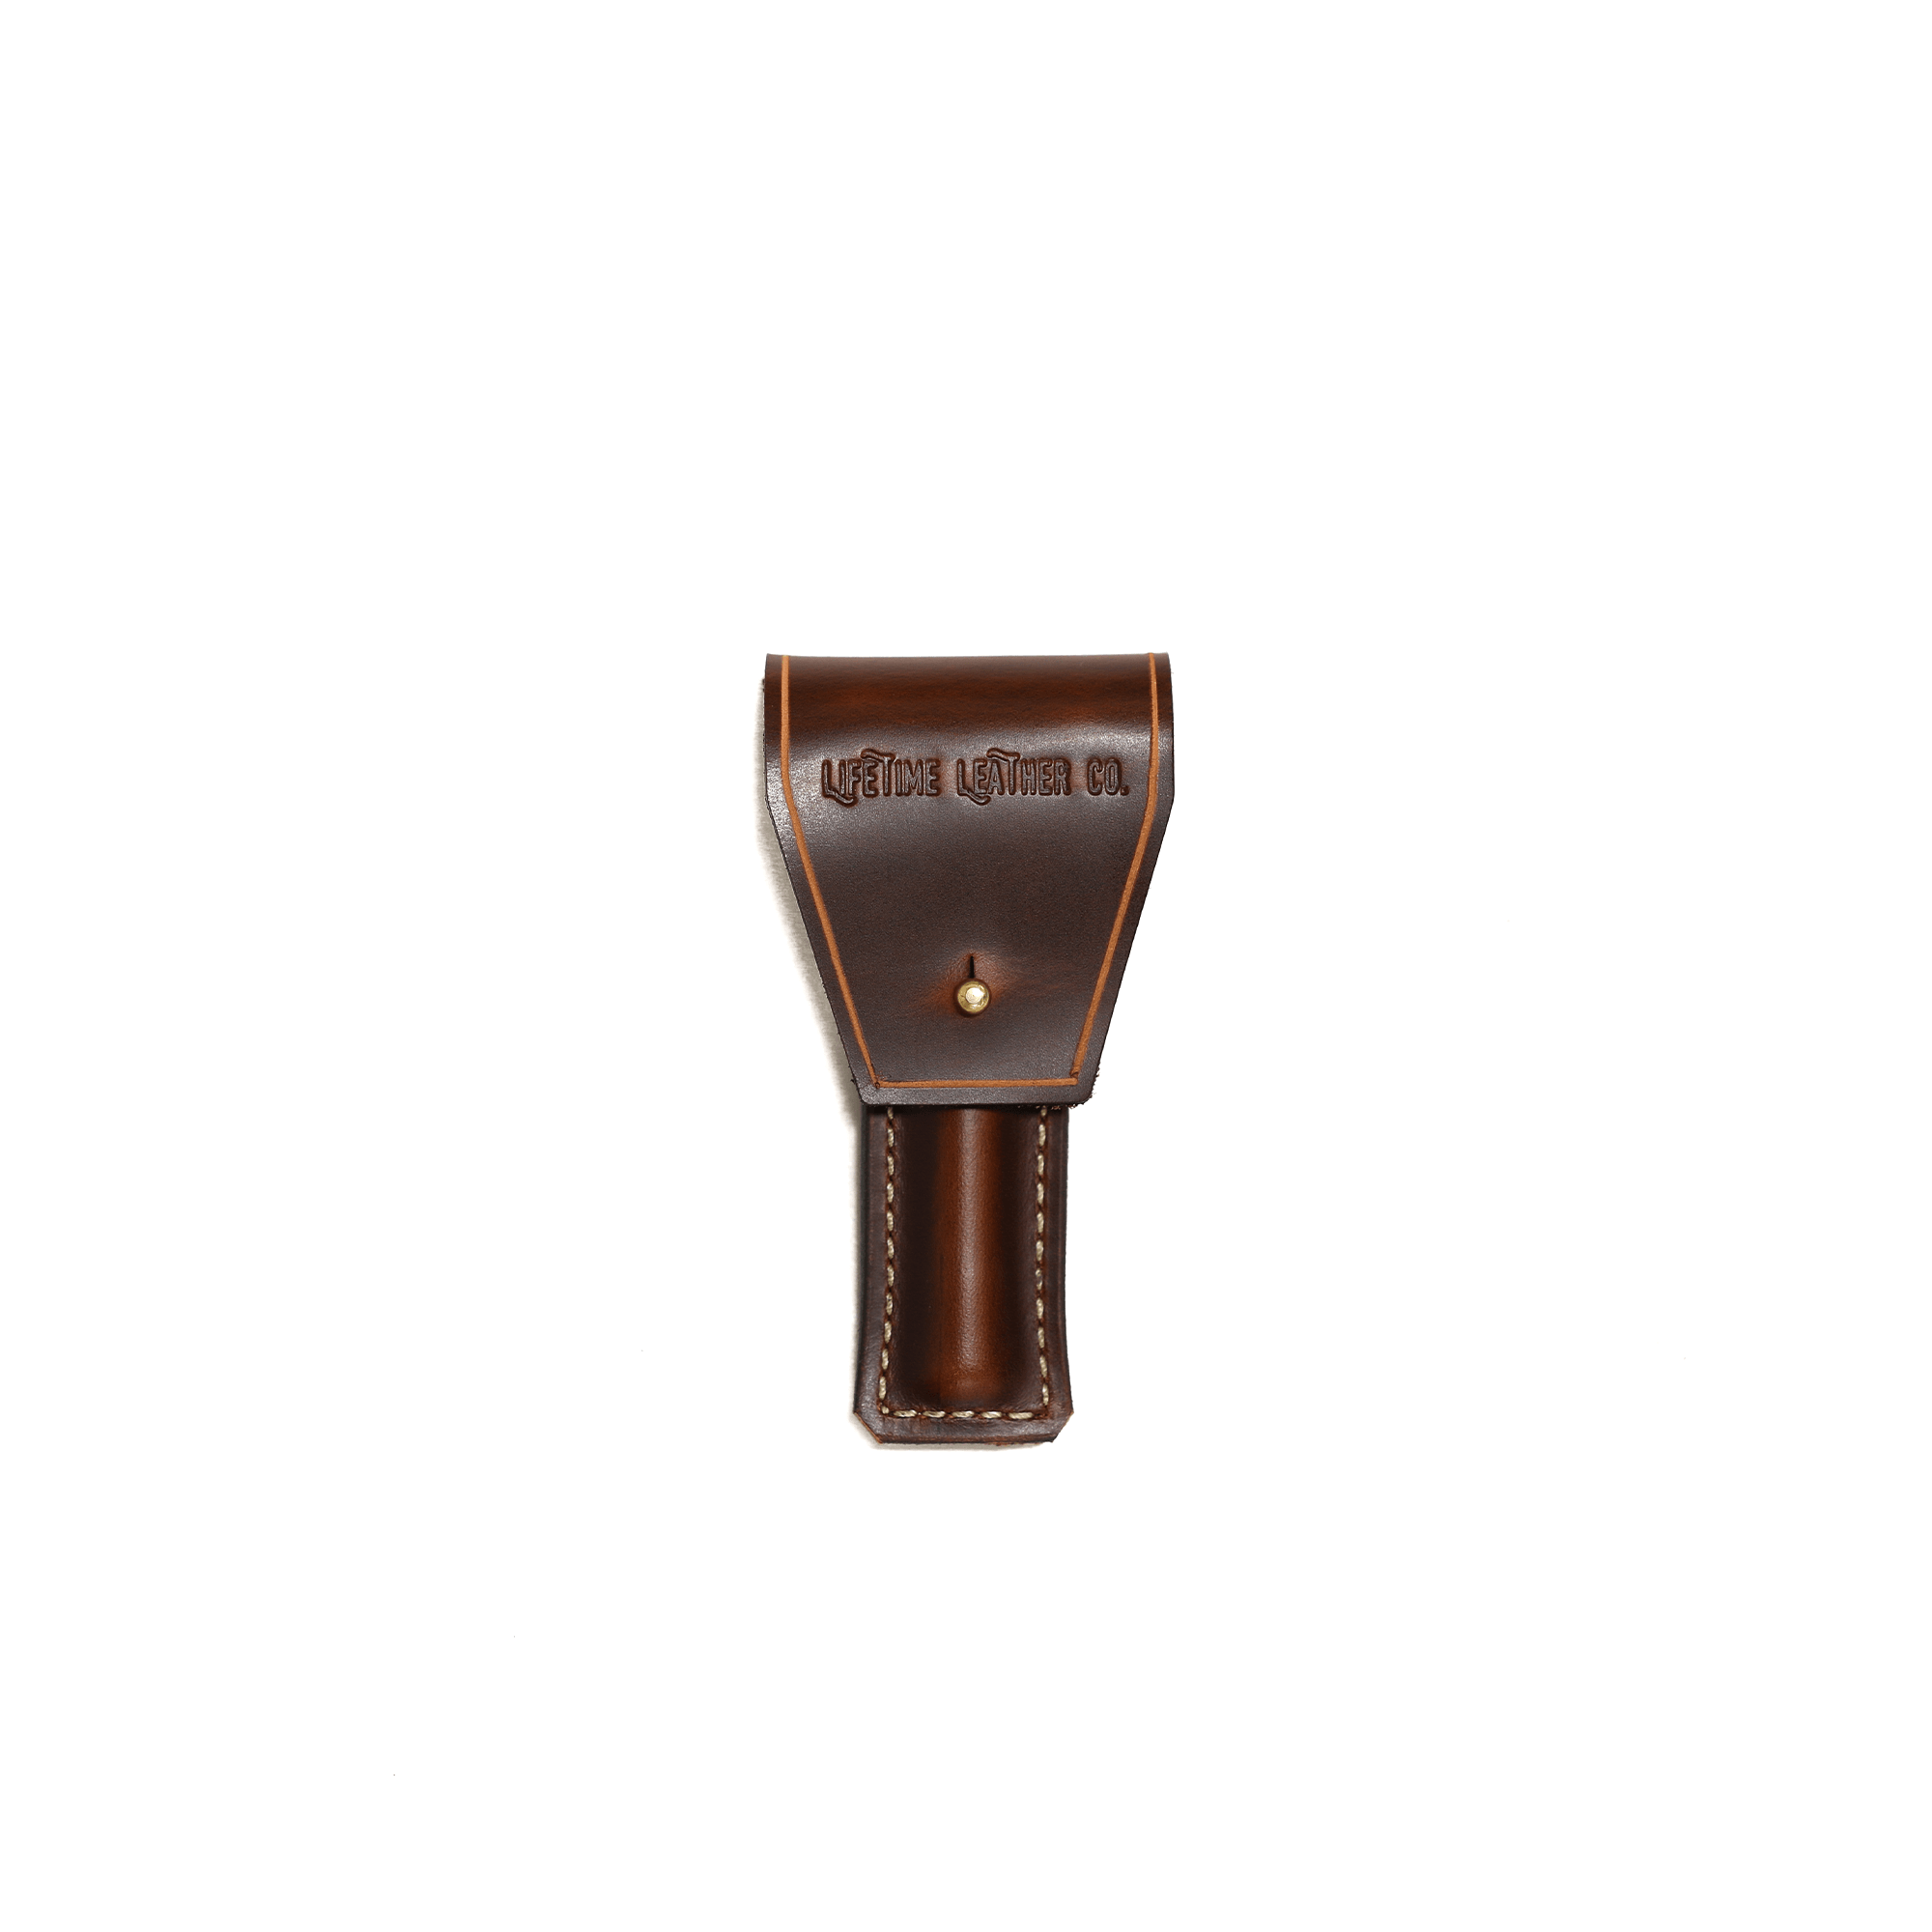  Safety Razor Holder by Lifetime Leather Co Lifetime Leather Co Perfumarie